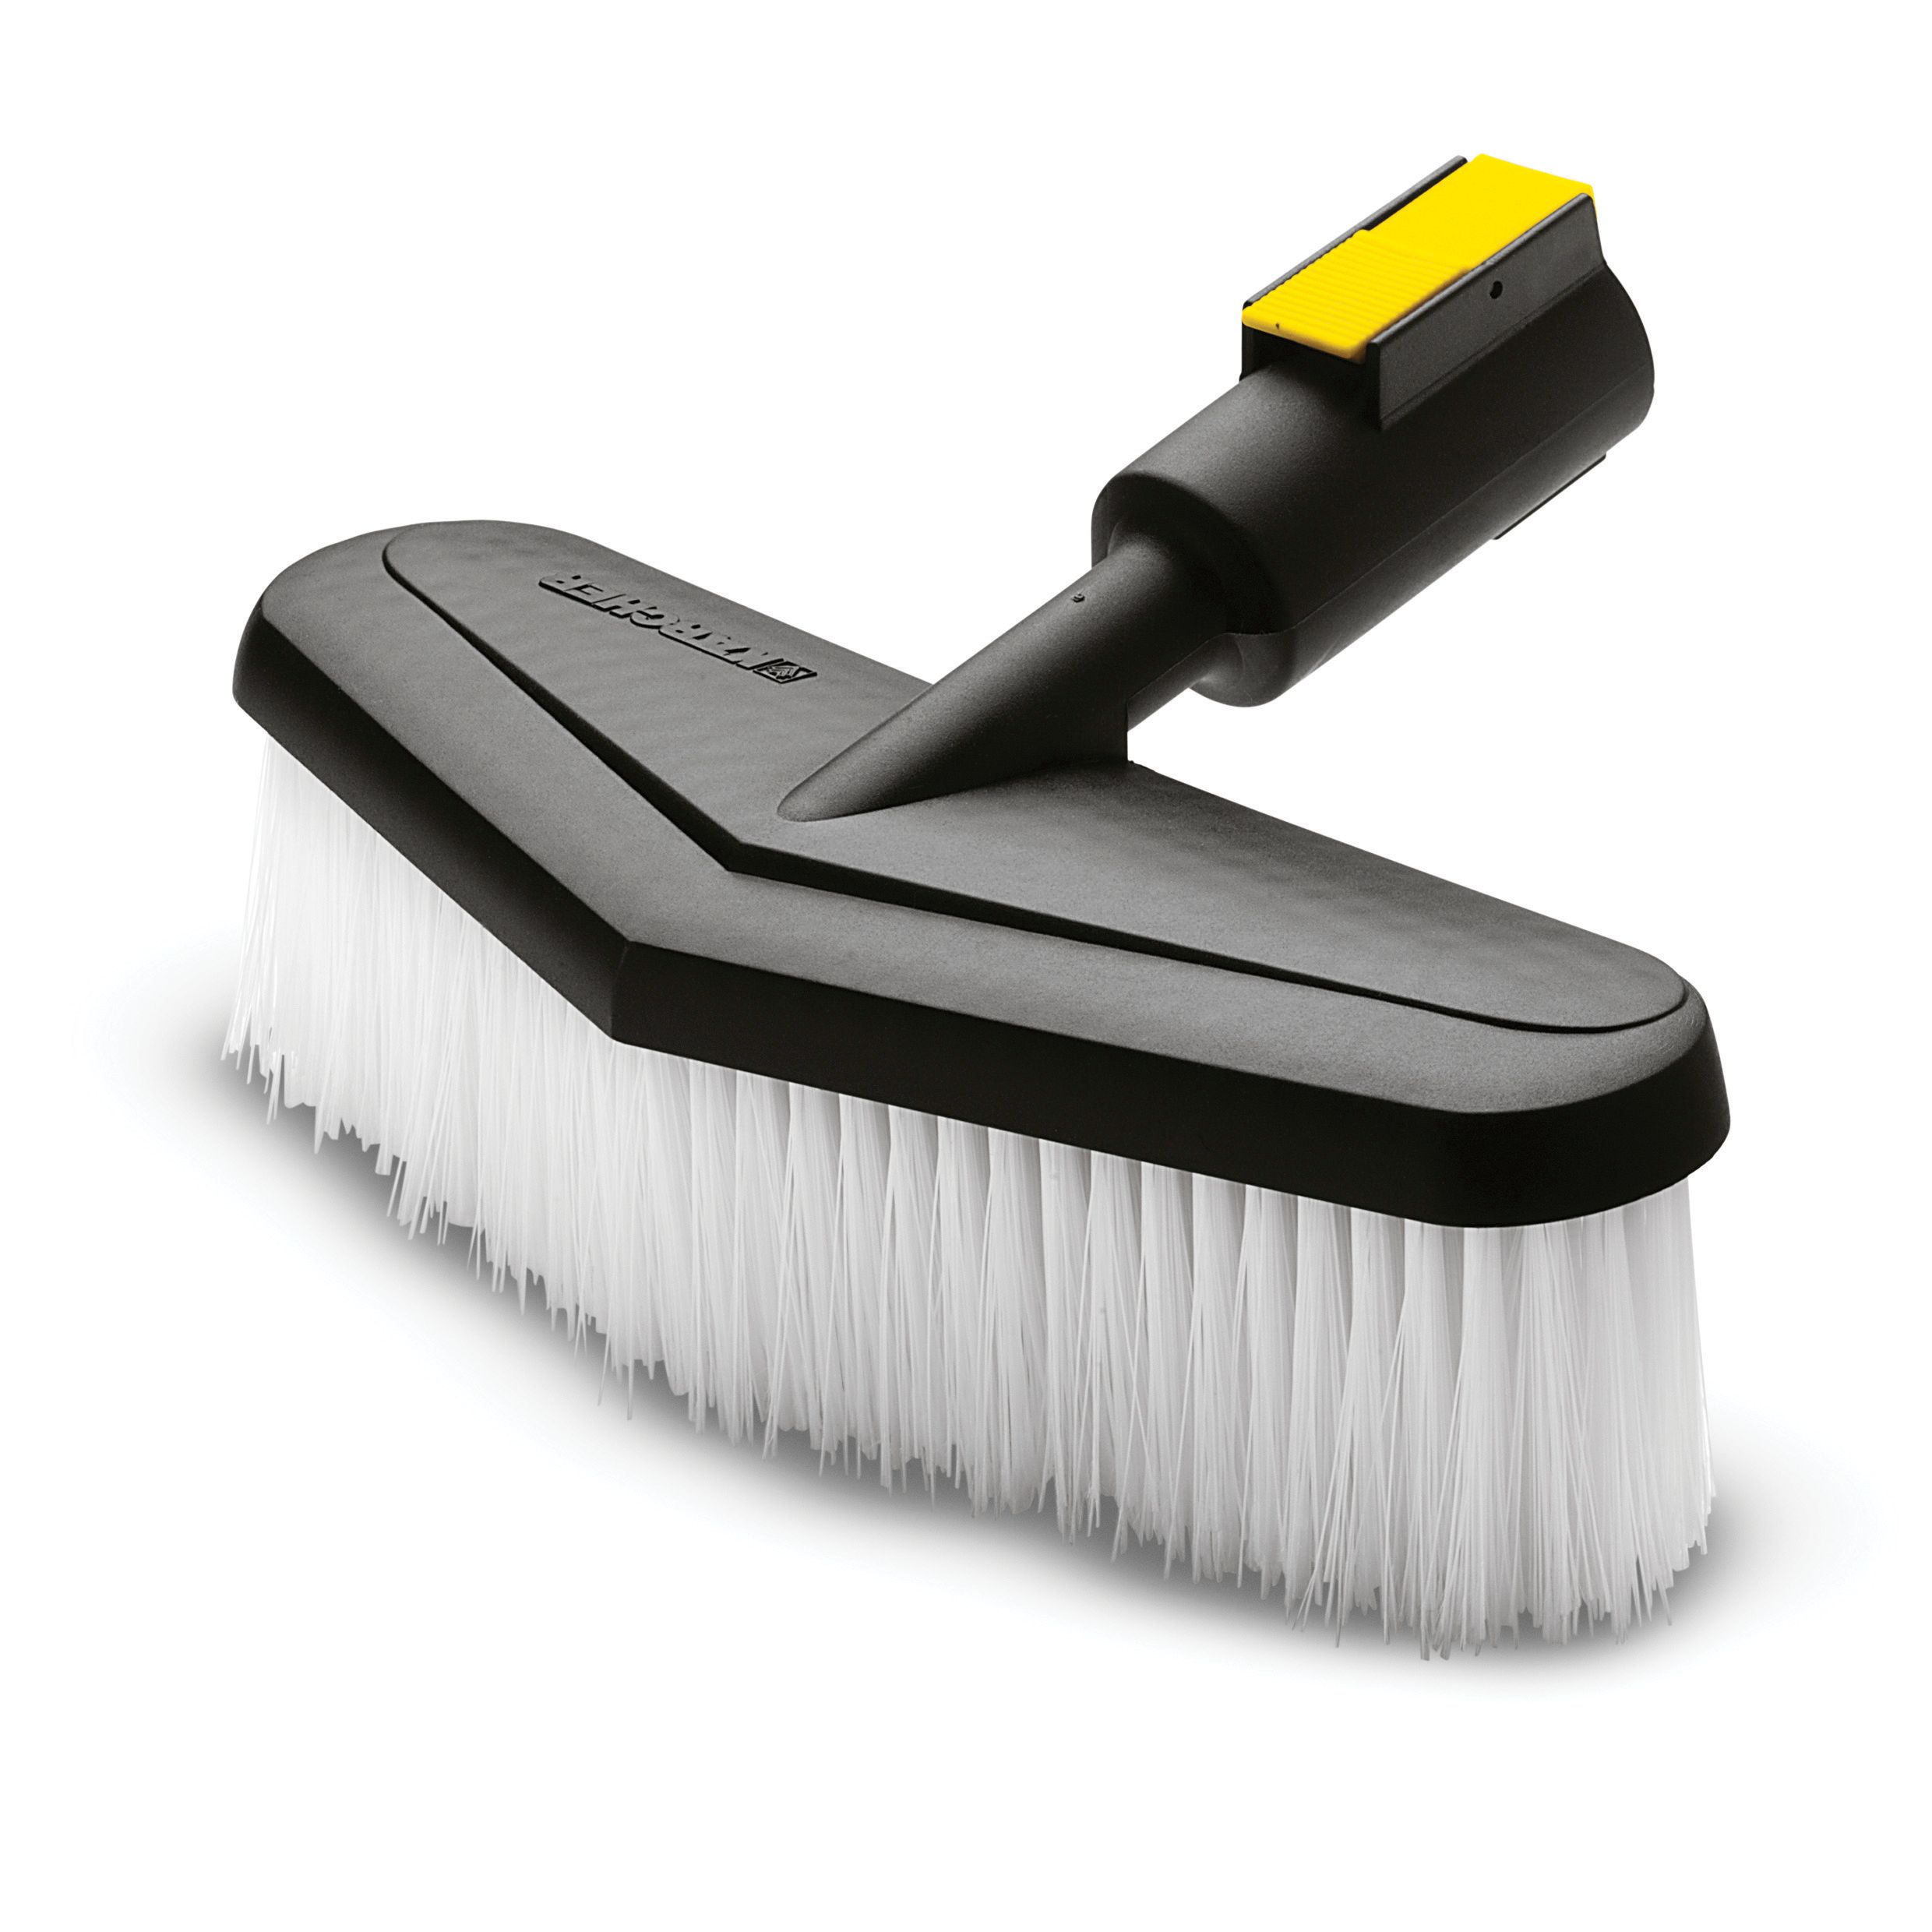 Image of Karcher Xpert Deluxe Wash Brush